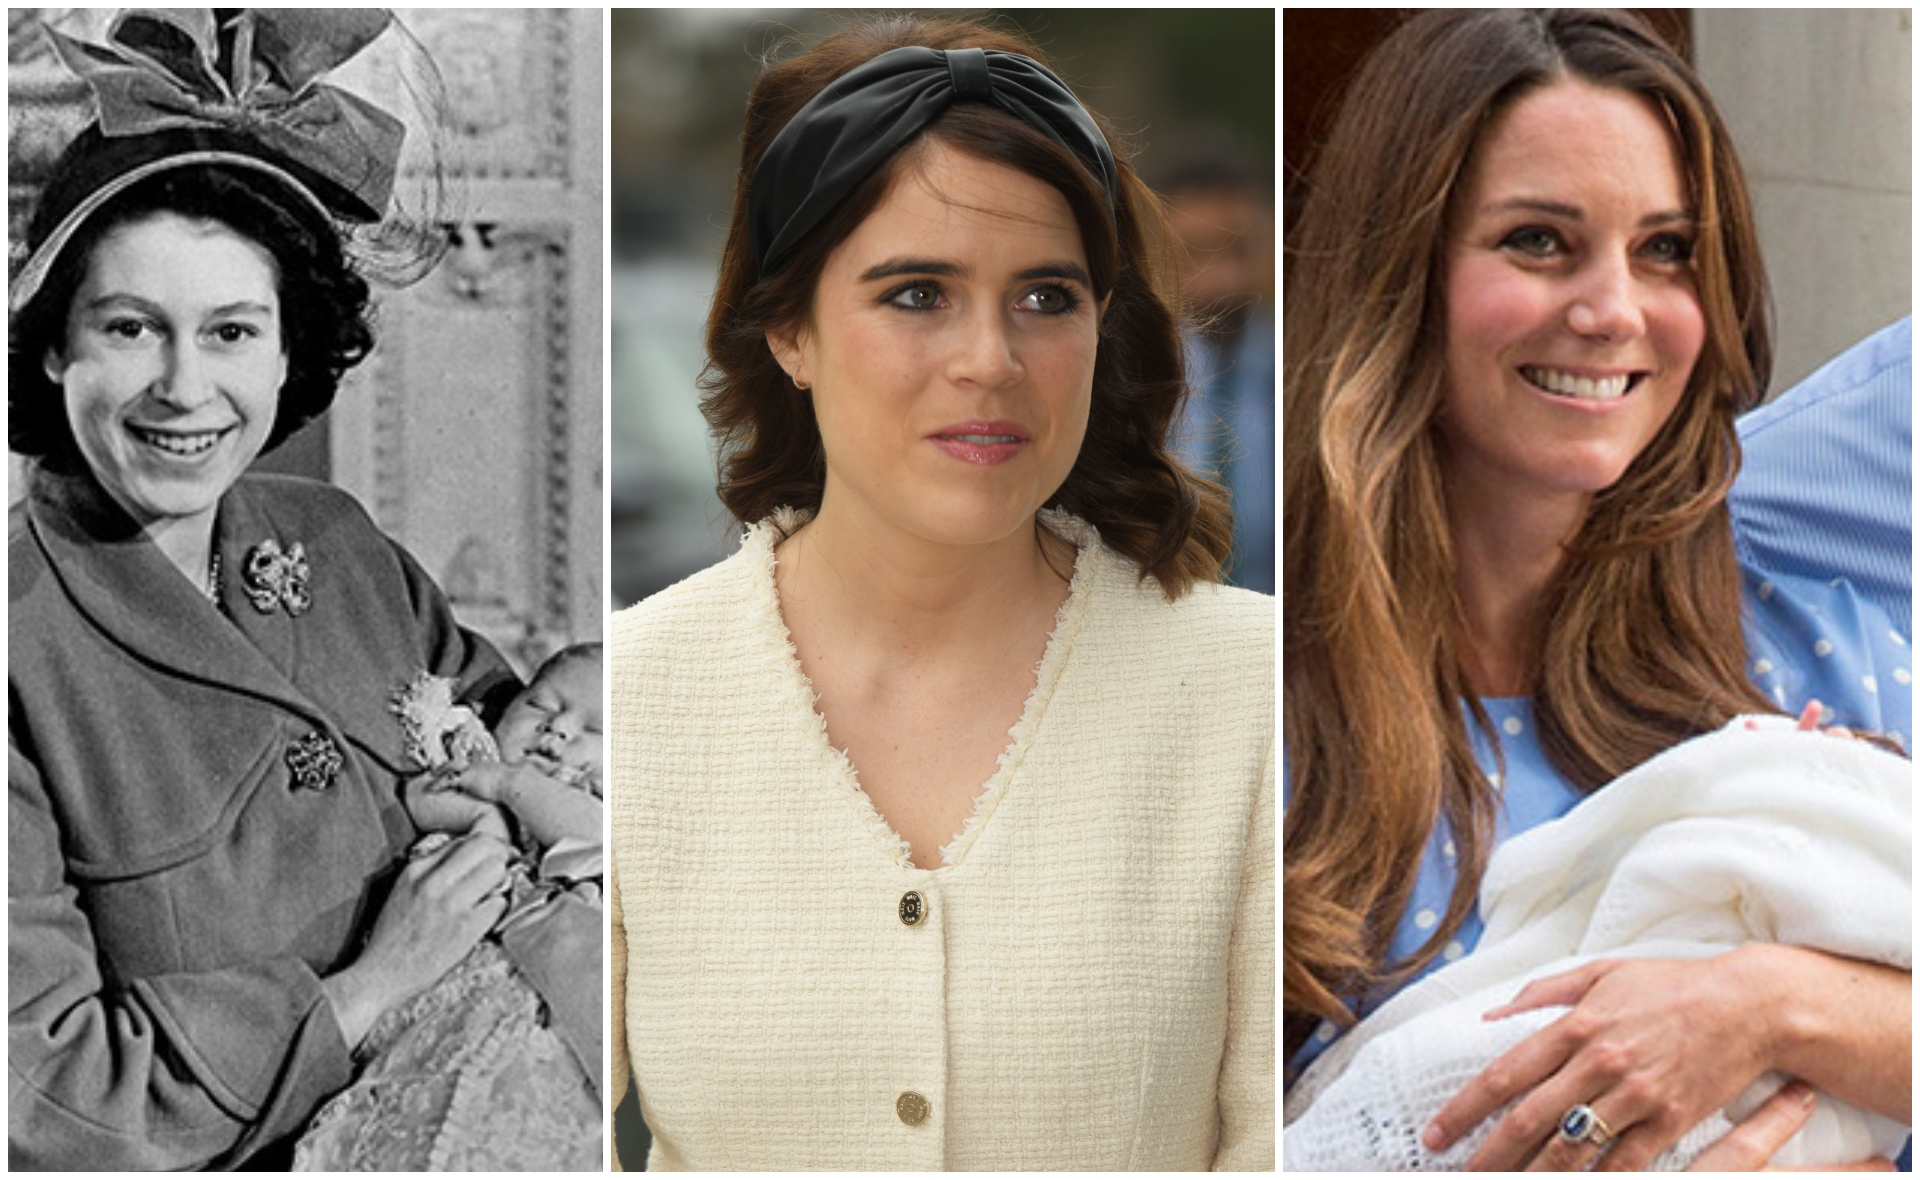 From a room packed with “witnesses” to COVID-friendly procedures: These are the fascinating ways royal births have changed throughout the years